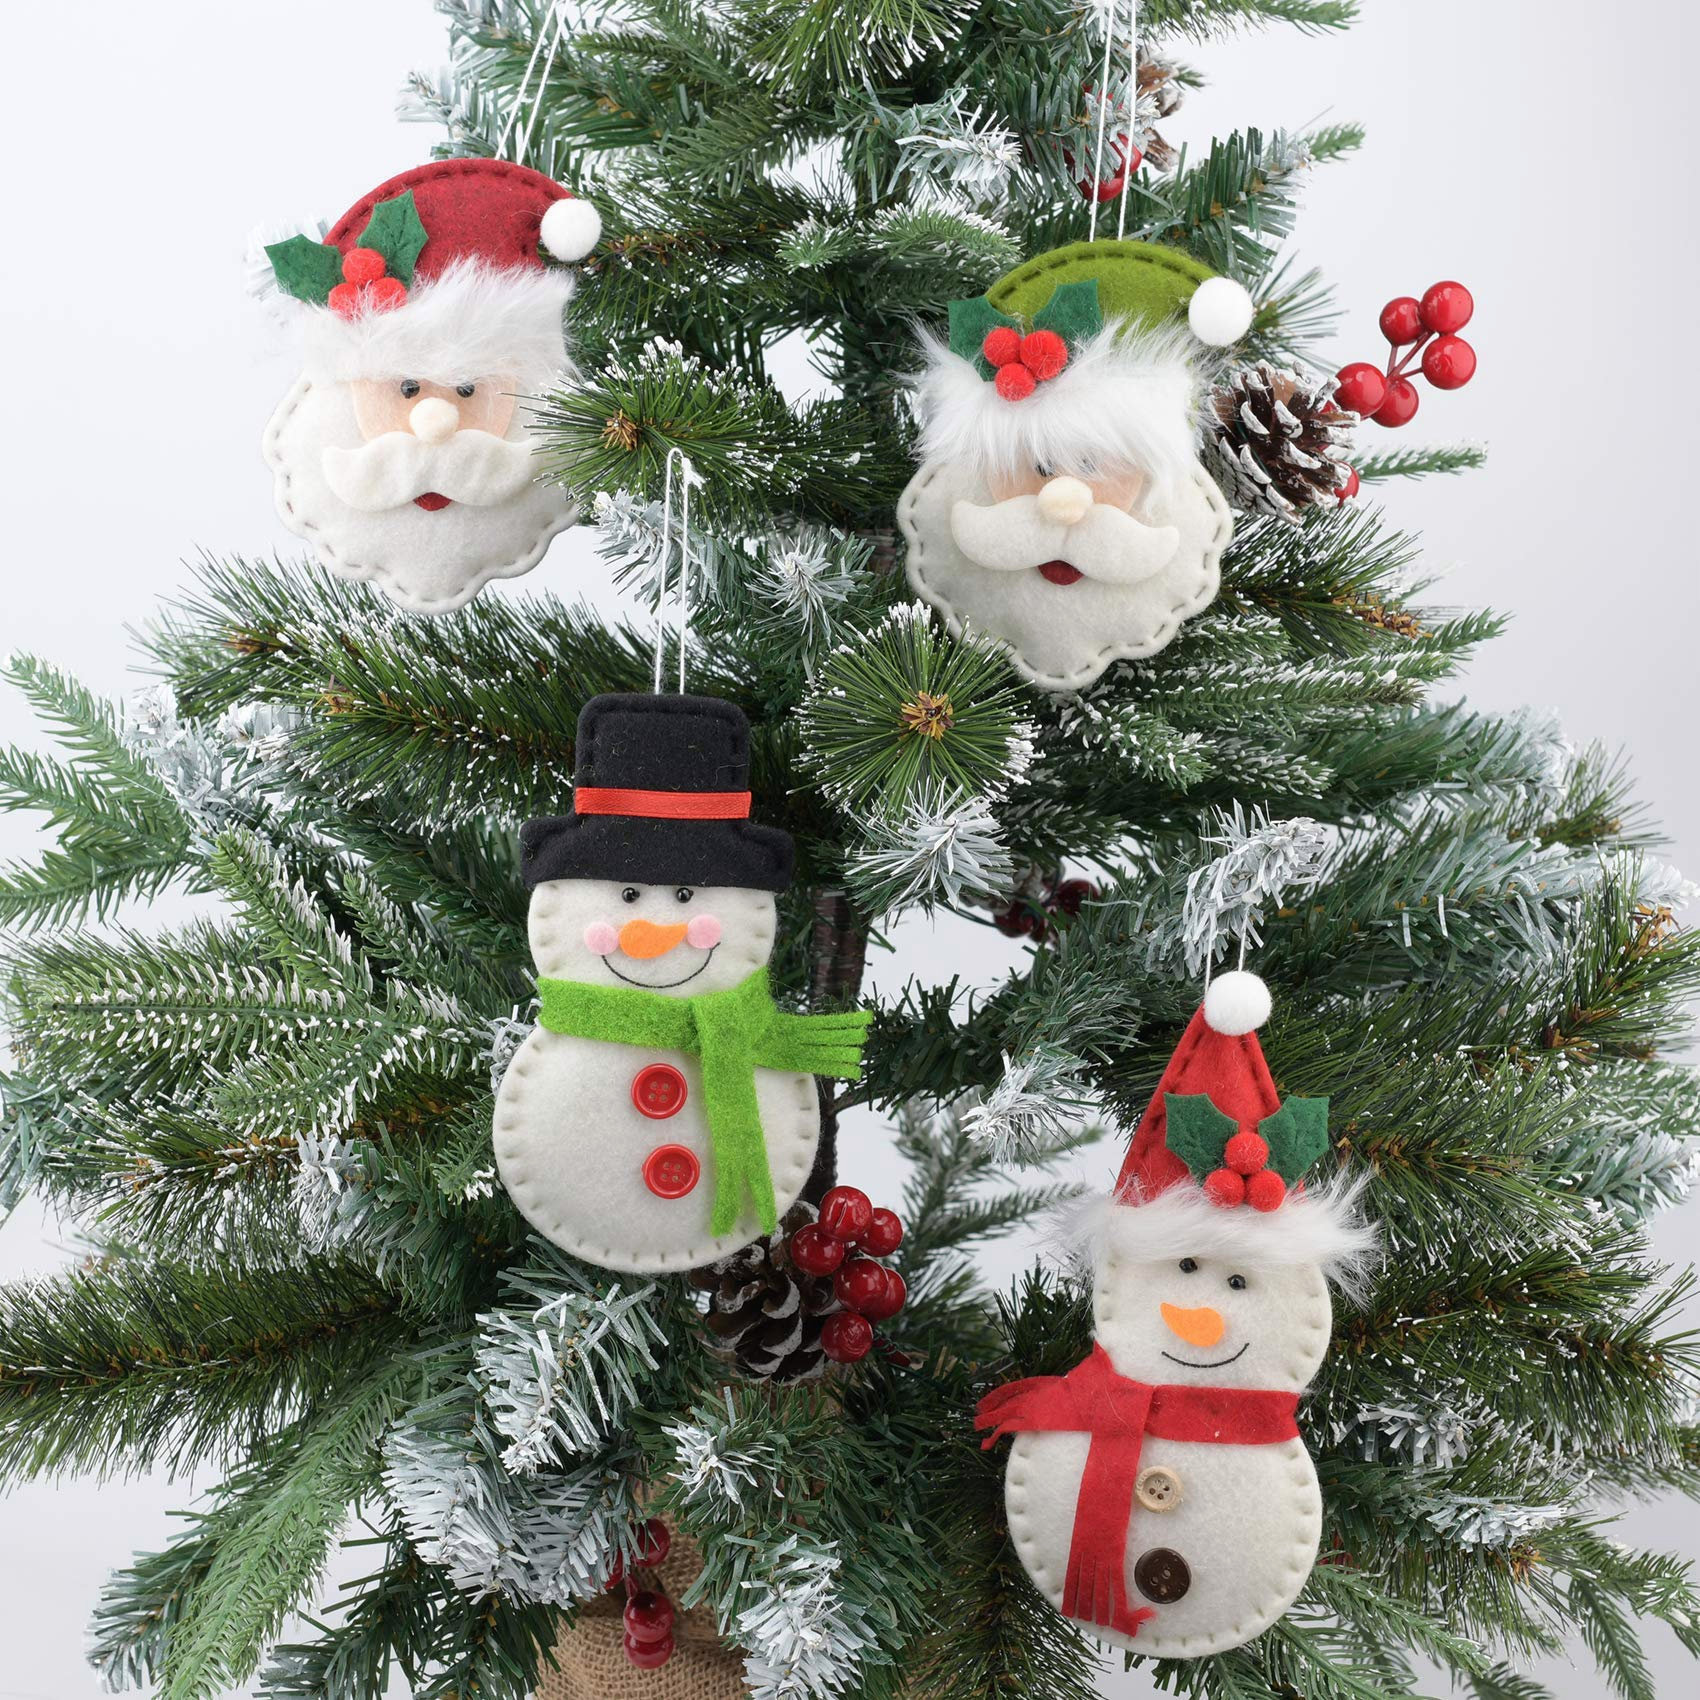 Pack of 8 Hanging Felt Ornaments Approx 5 Inches Each Christmas Tree Decorations Ornaments Christmas Santa Clause Snowman Candy Cane Stocking Design Pendant for Christmas Holiday Home Party Decor 